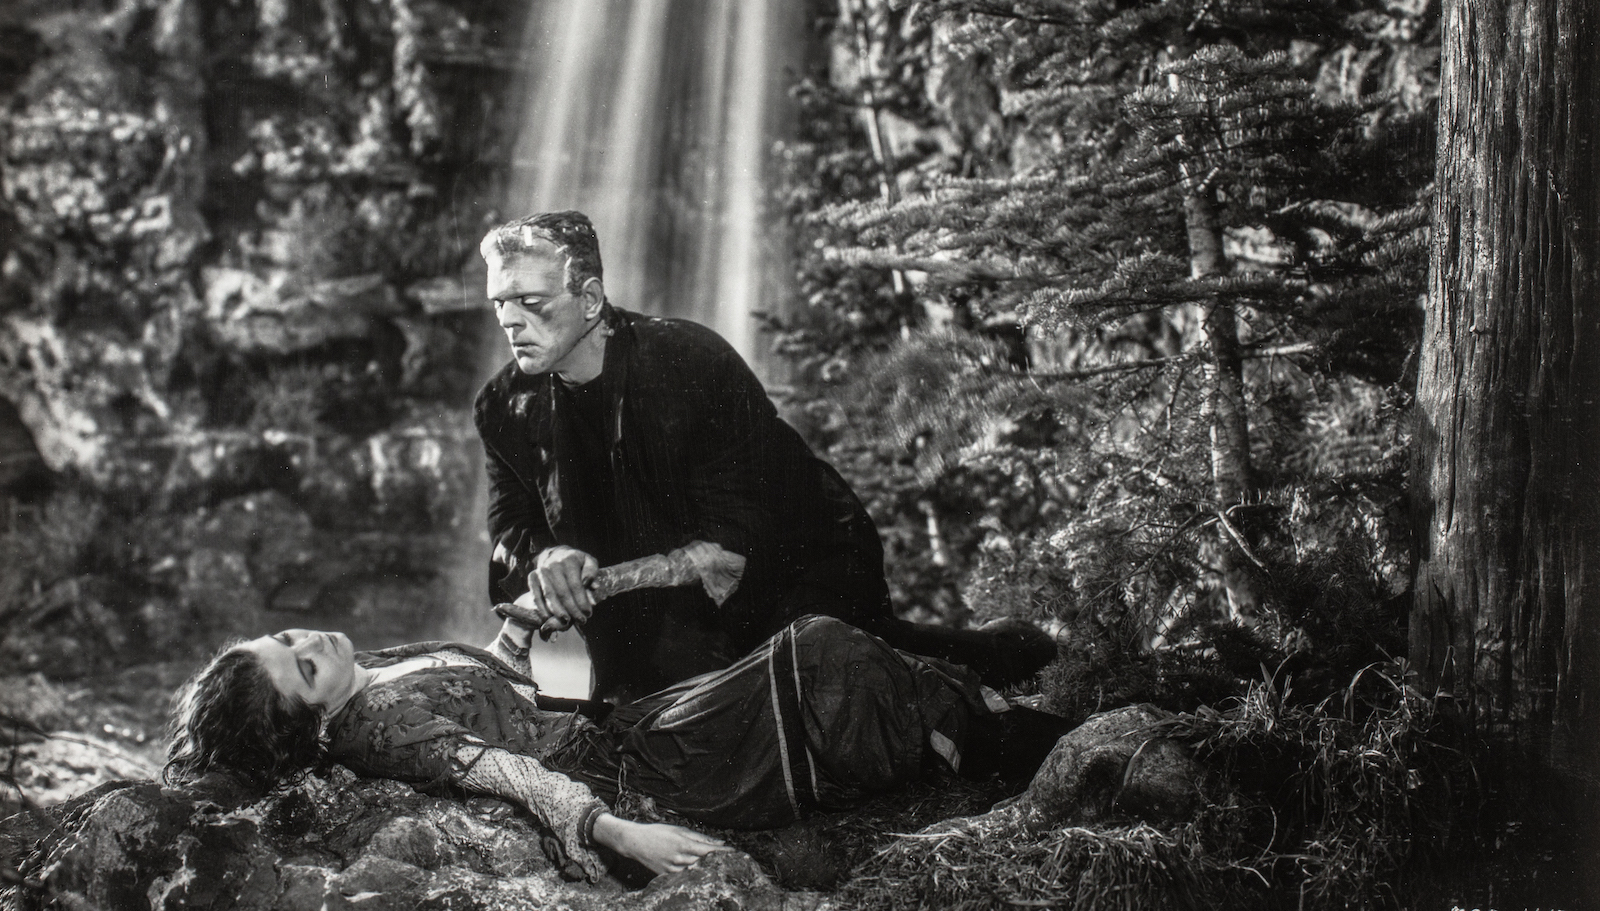 Frankenstein's monster stands over a reclining woman's body by a waterfall